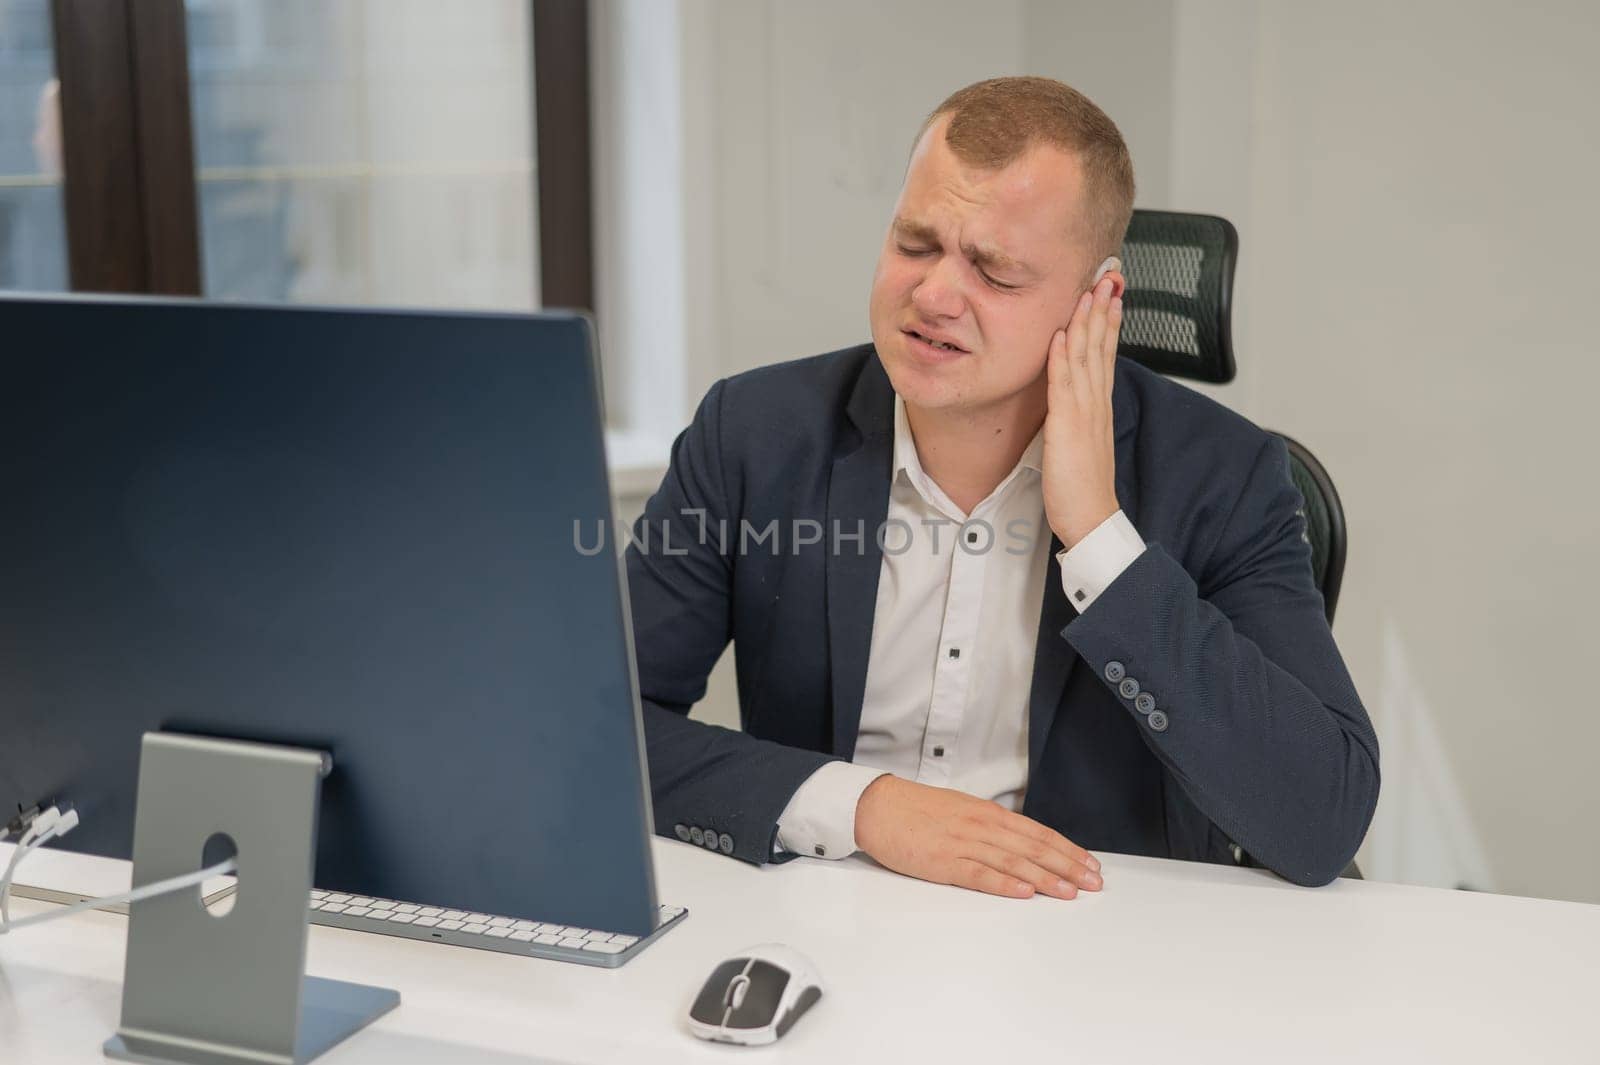 A deaf man works at a computer in the office. Broken hearing aid causing pain